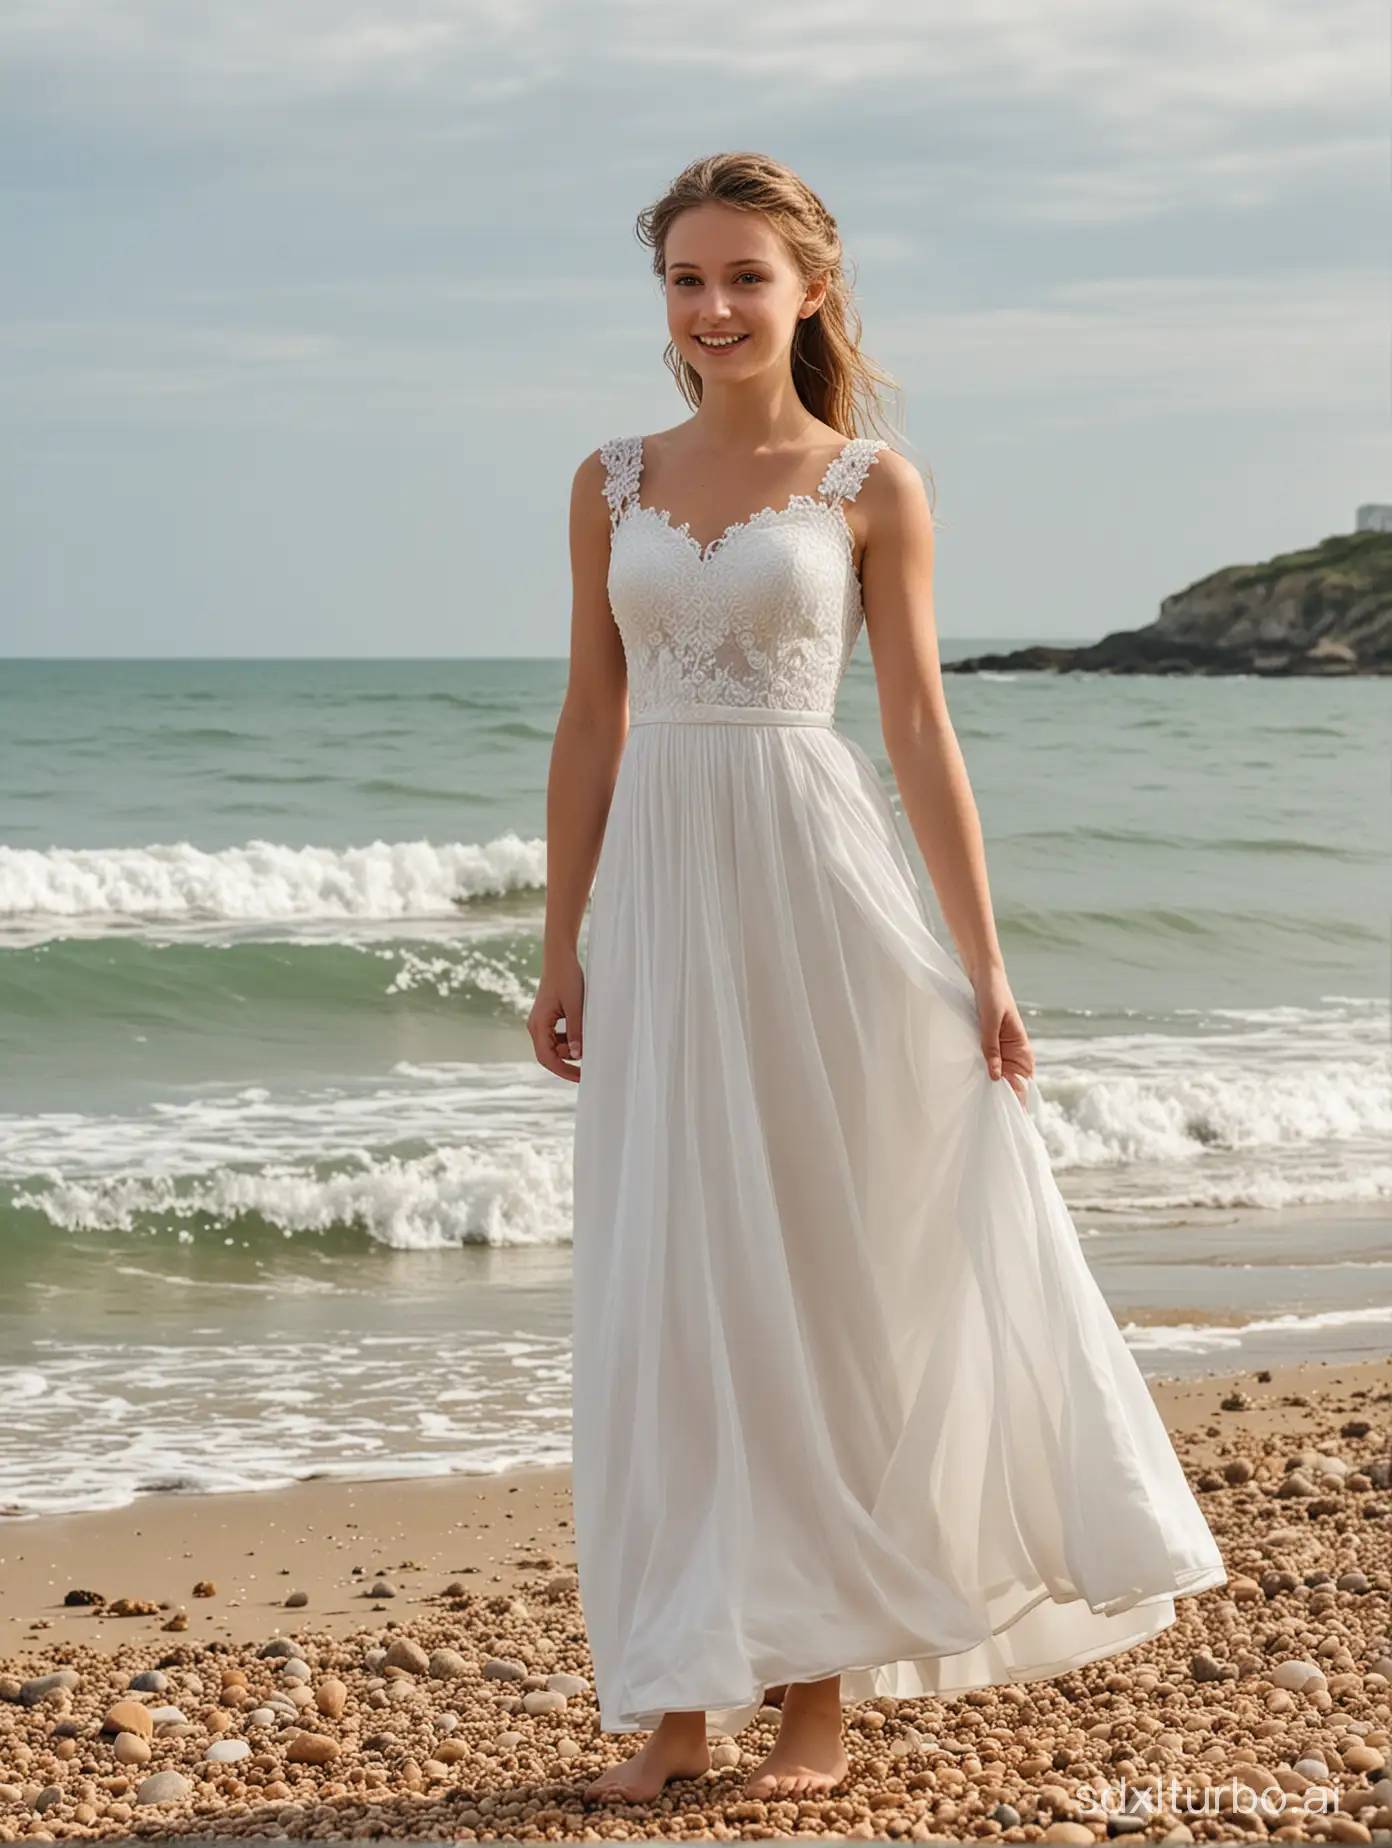 A girl at the seaside, wedding photography,